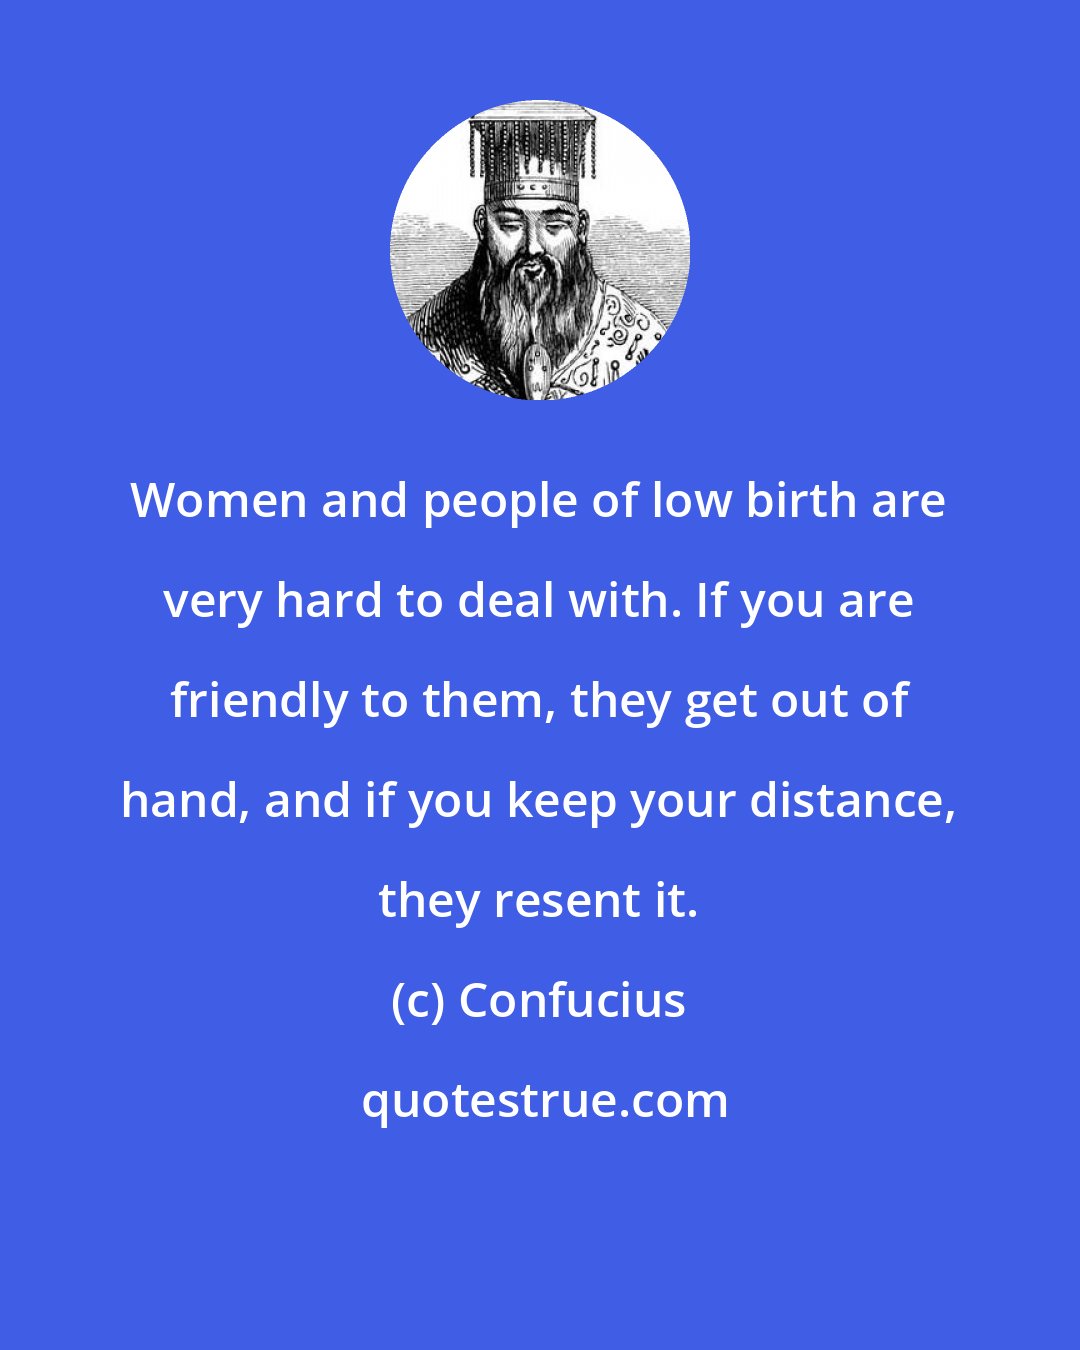 Confucius: Women and people of low birth are very hard to deal with. If you are friendly to them, they get out of hand, and if you keep your distance, they resent it.